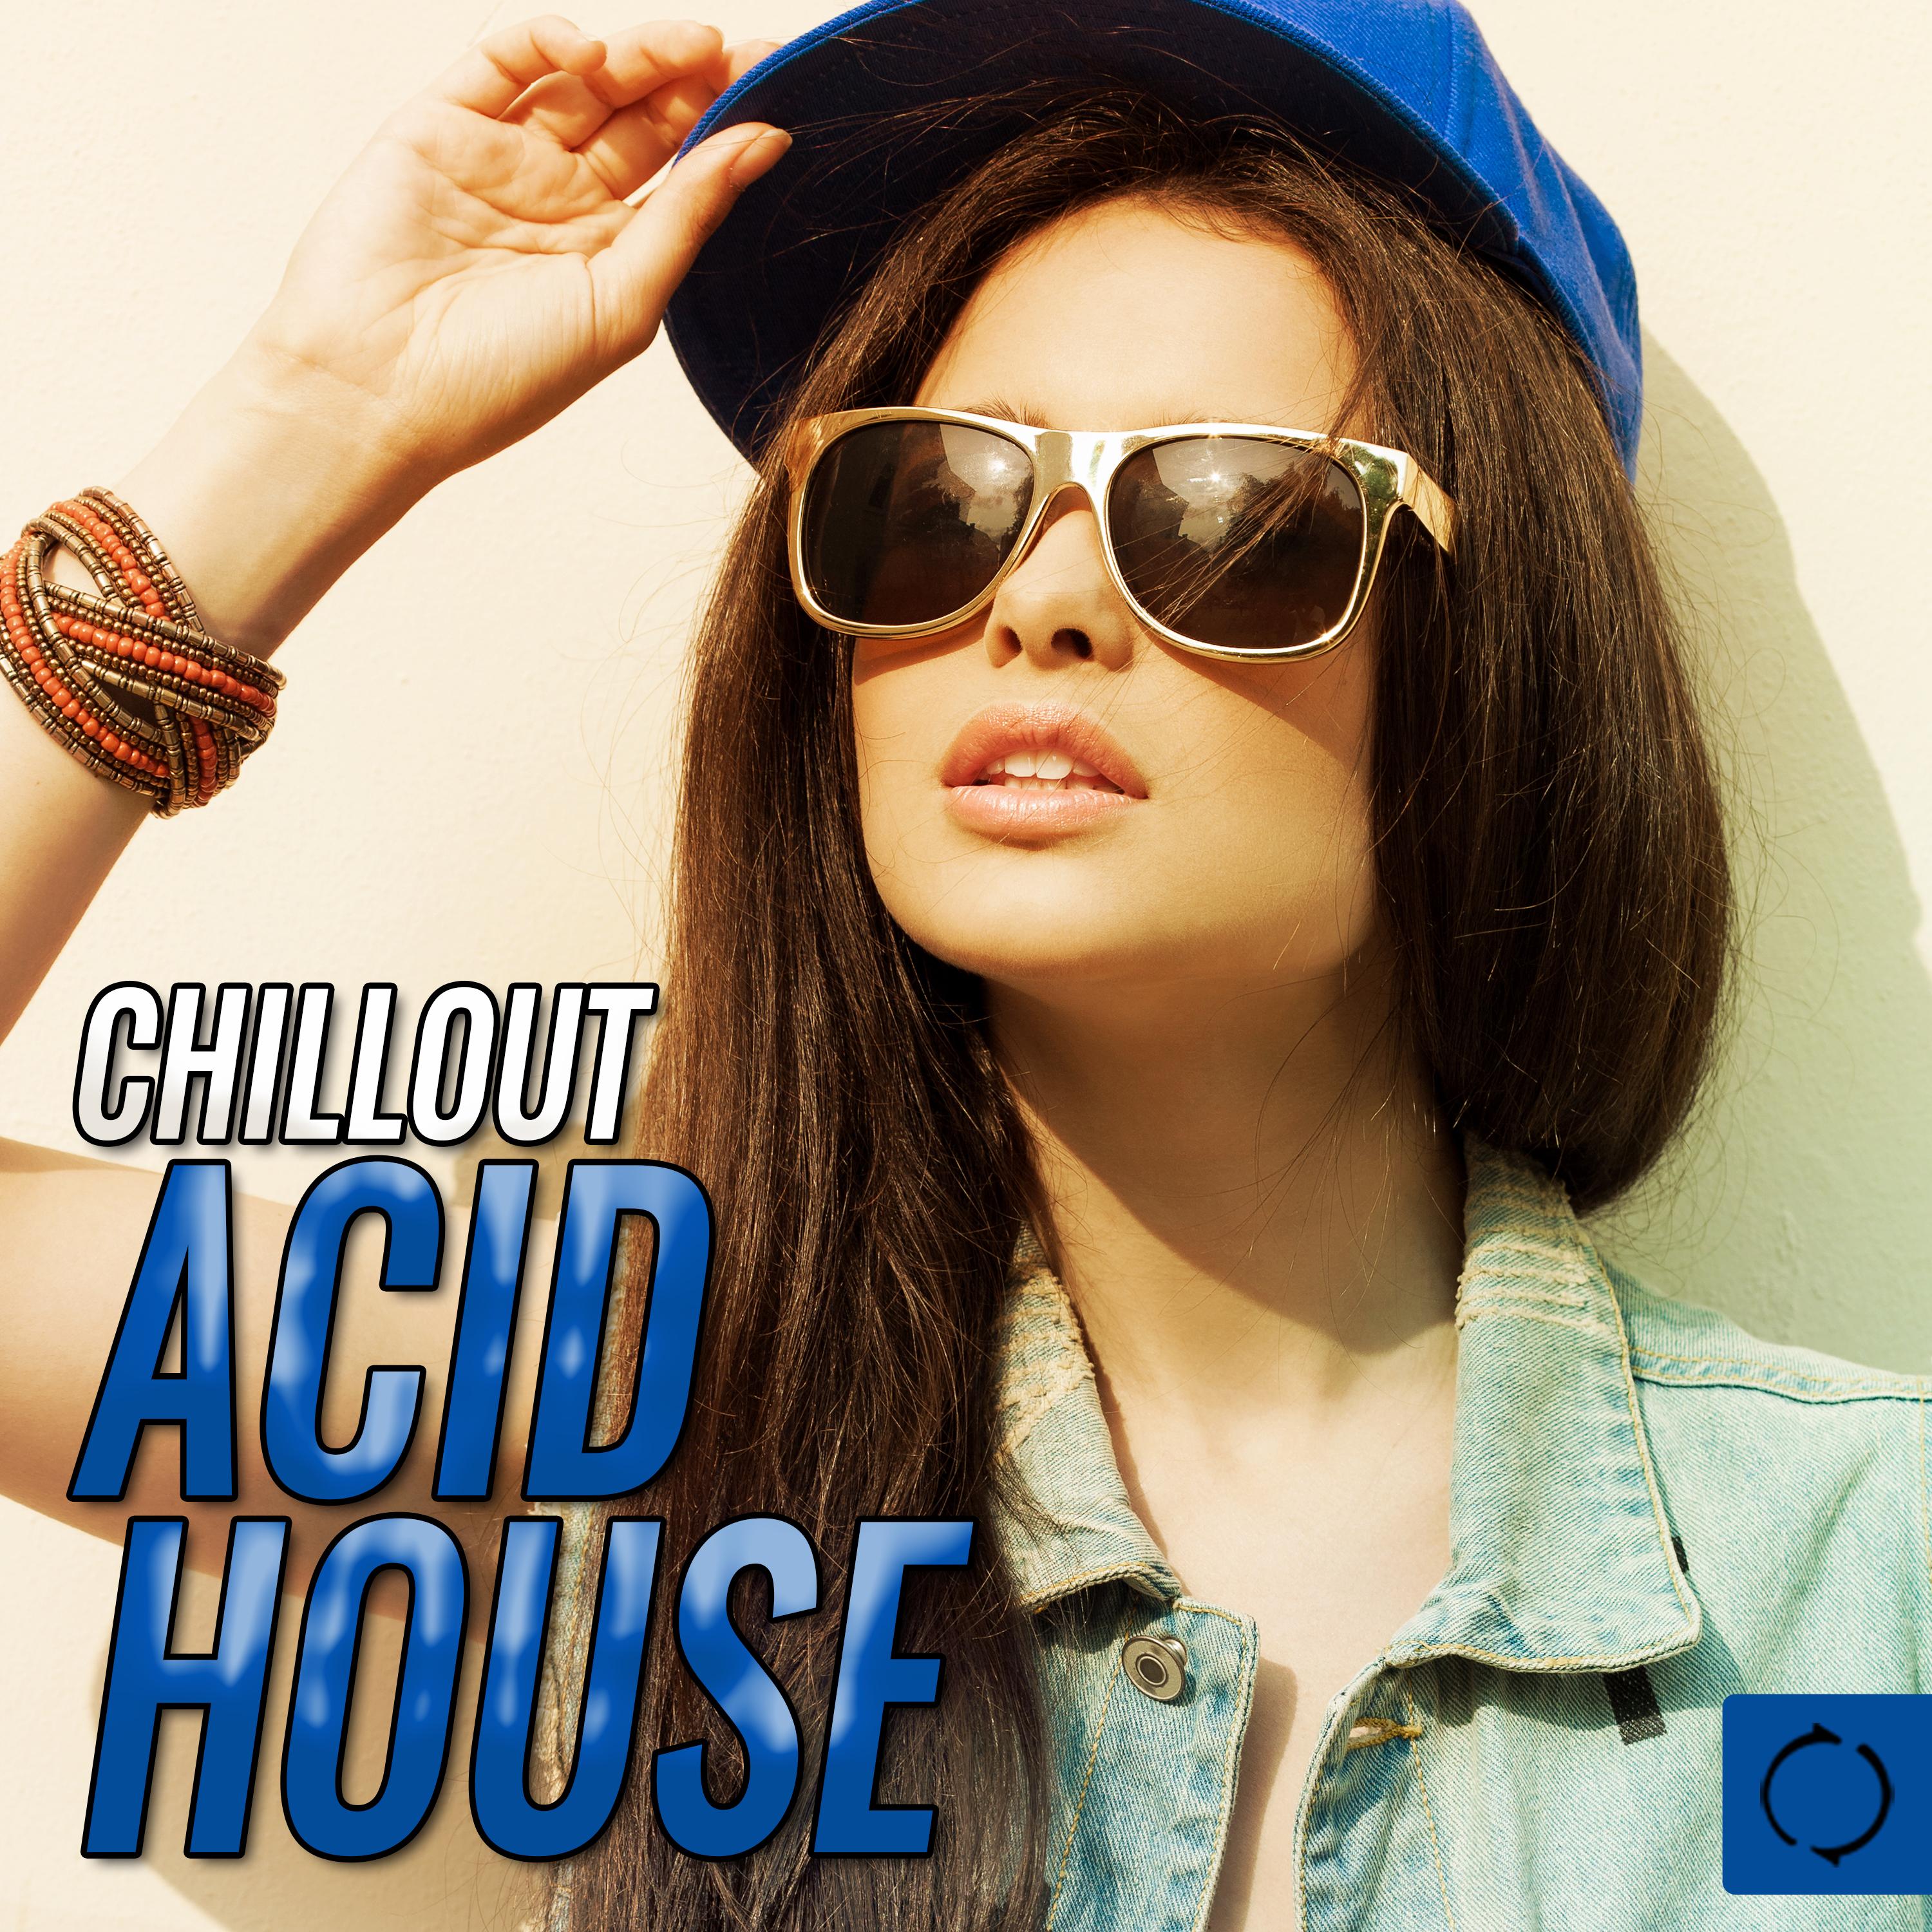 Chillout Acid House